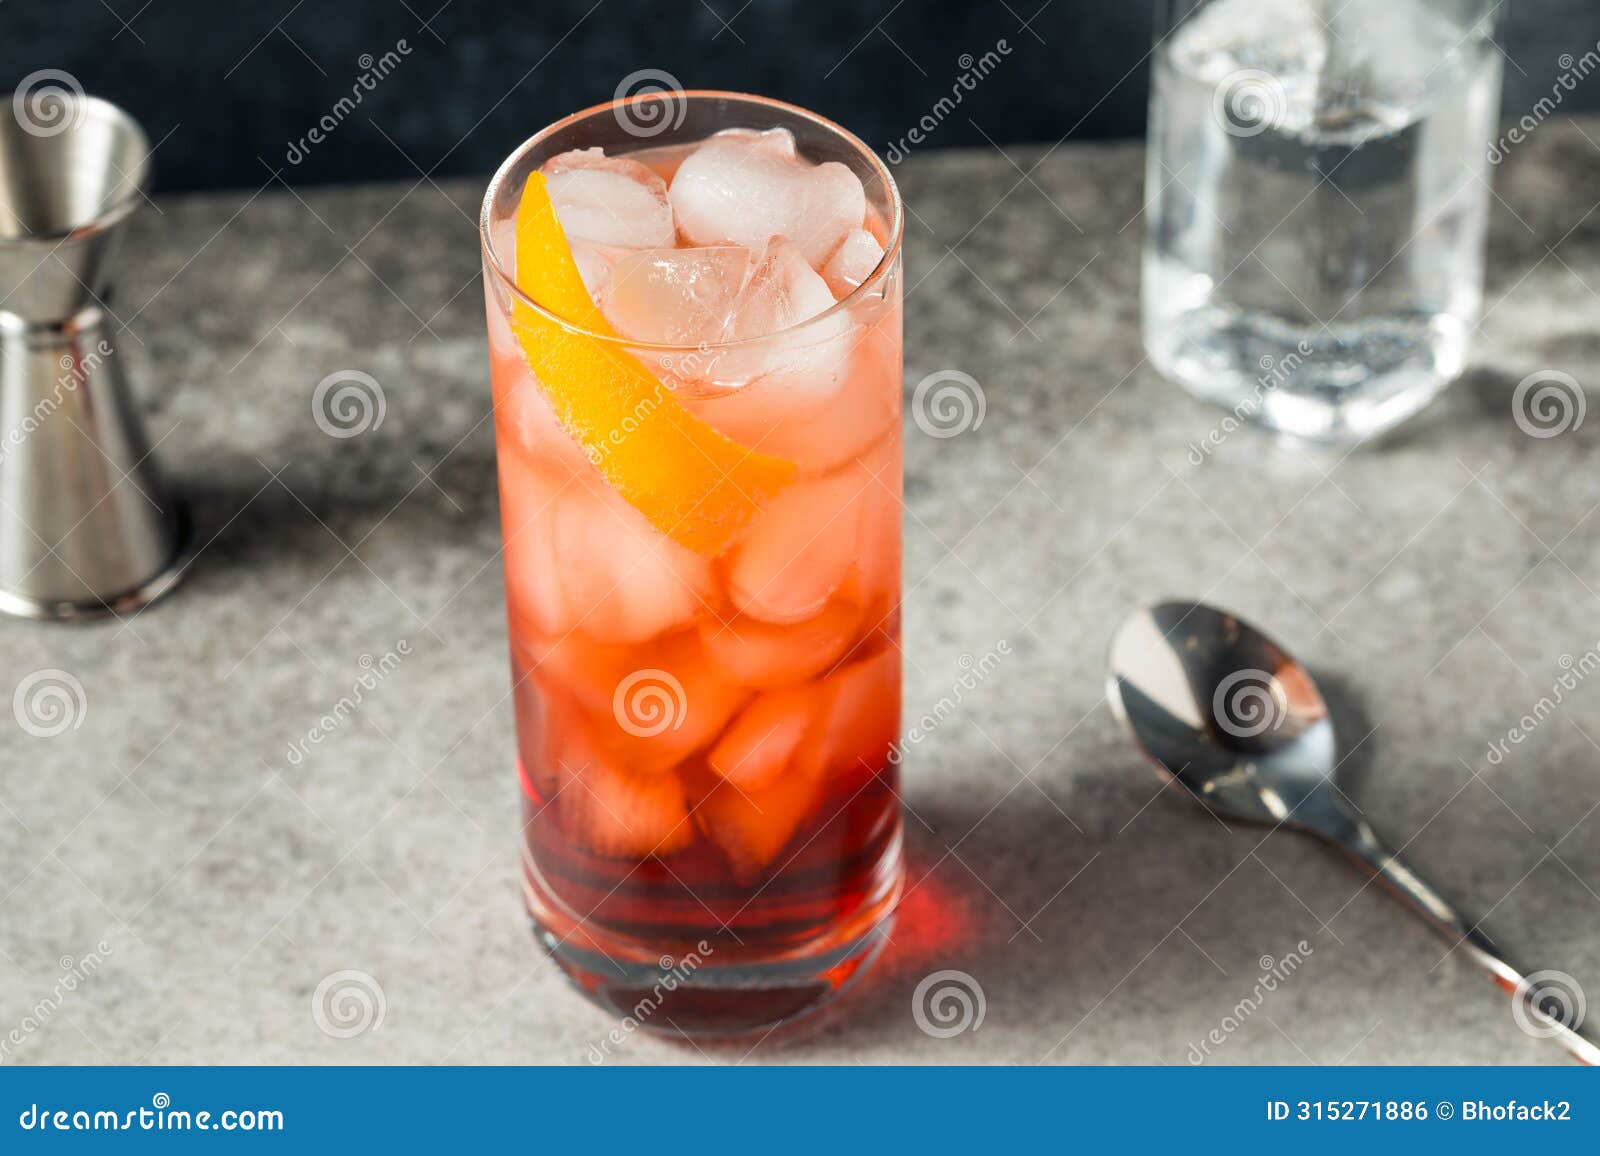 cold refreshing americano negroni cocktail